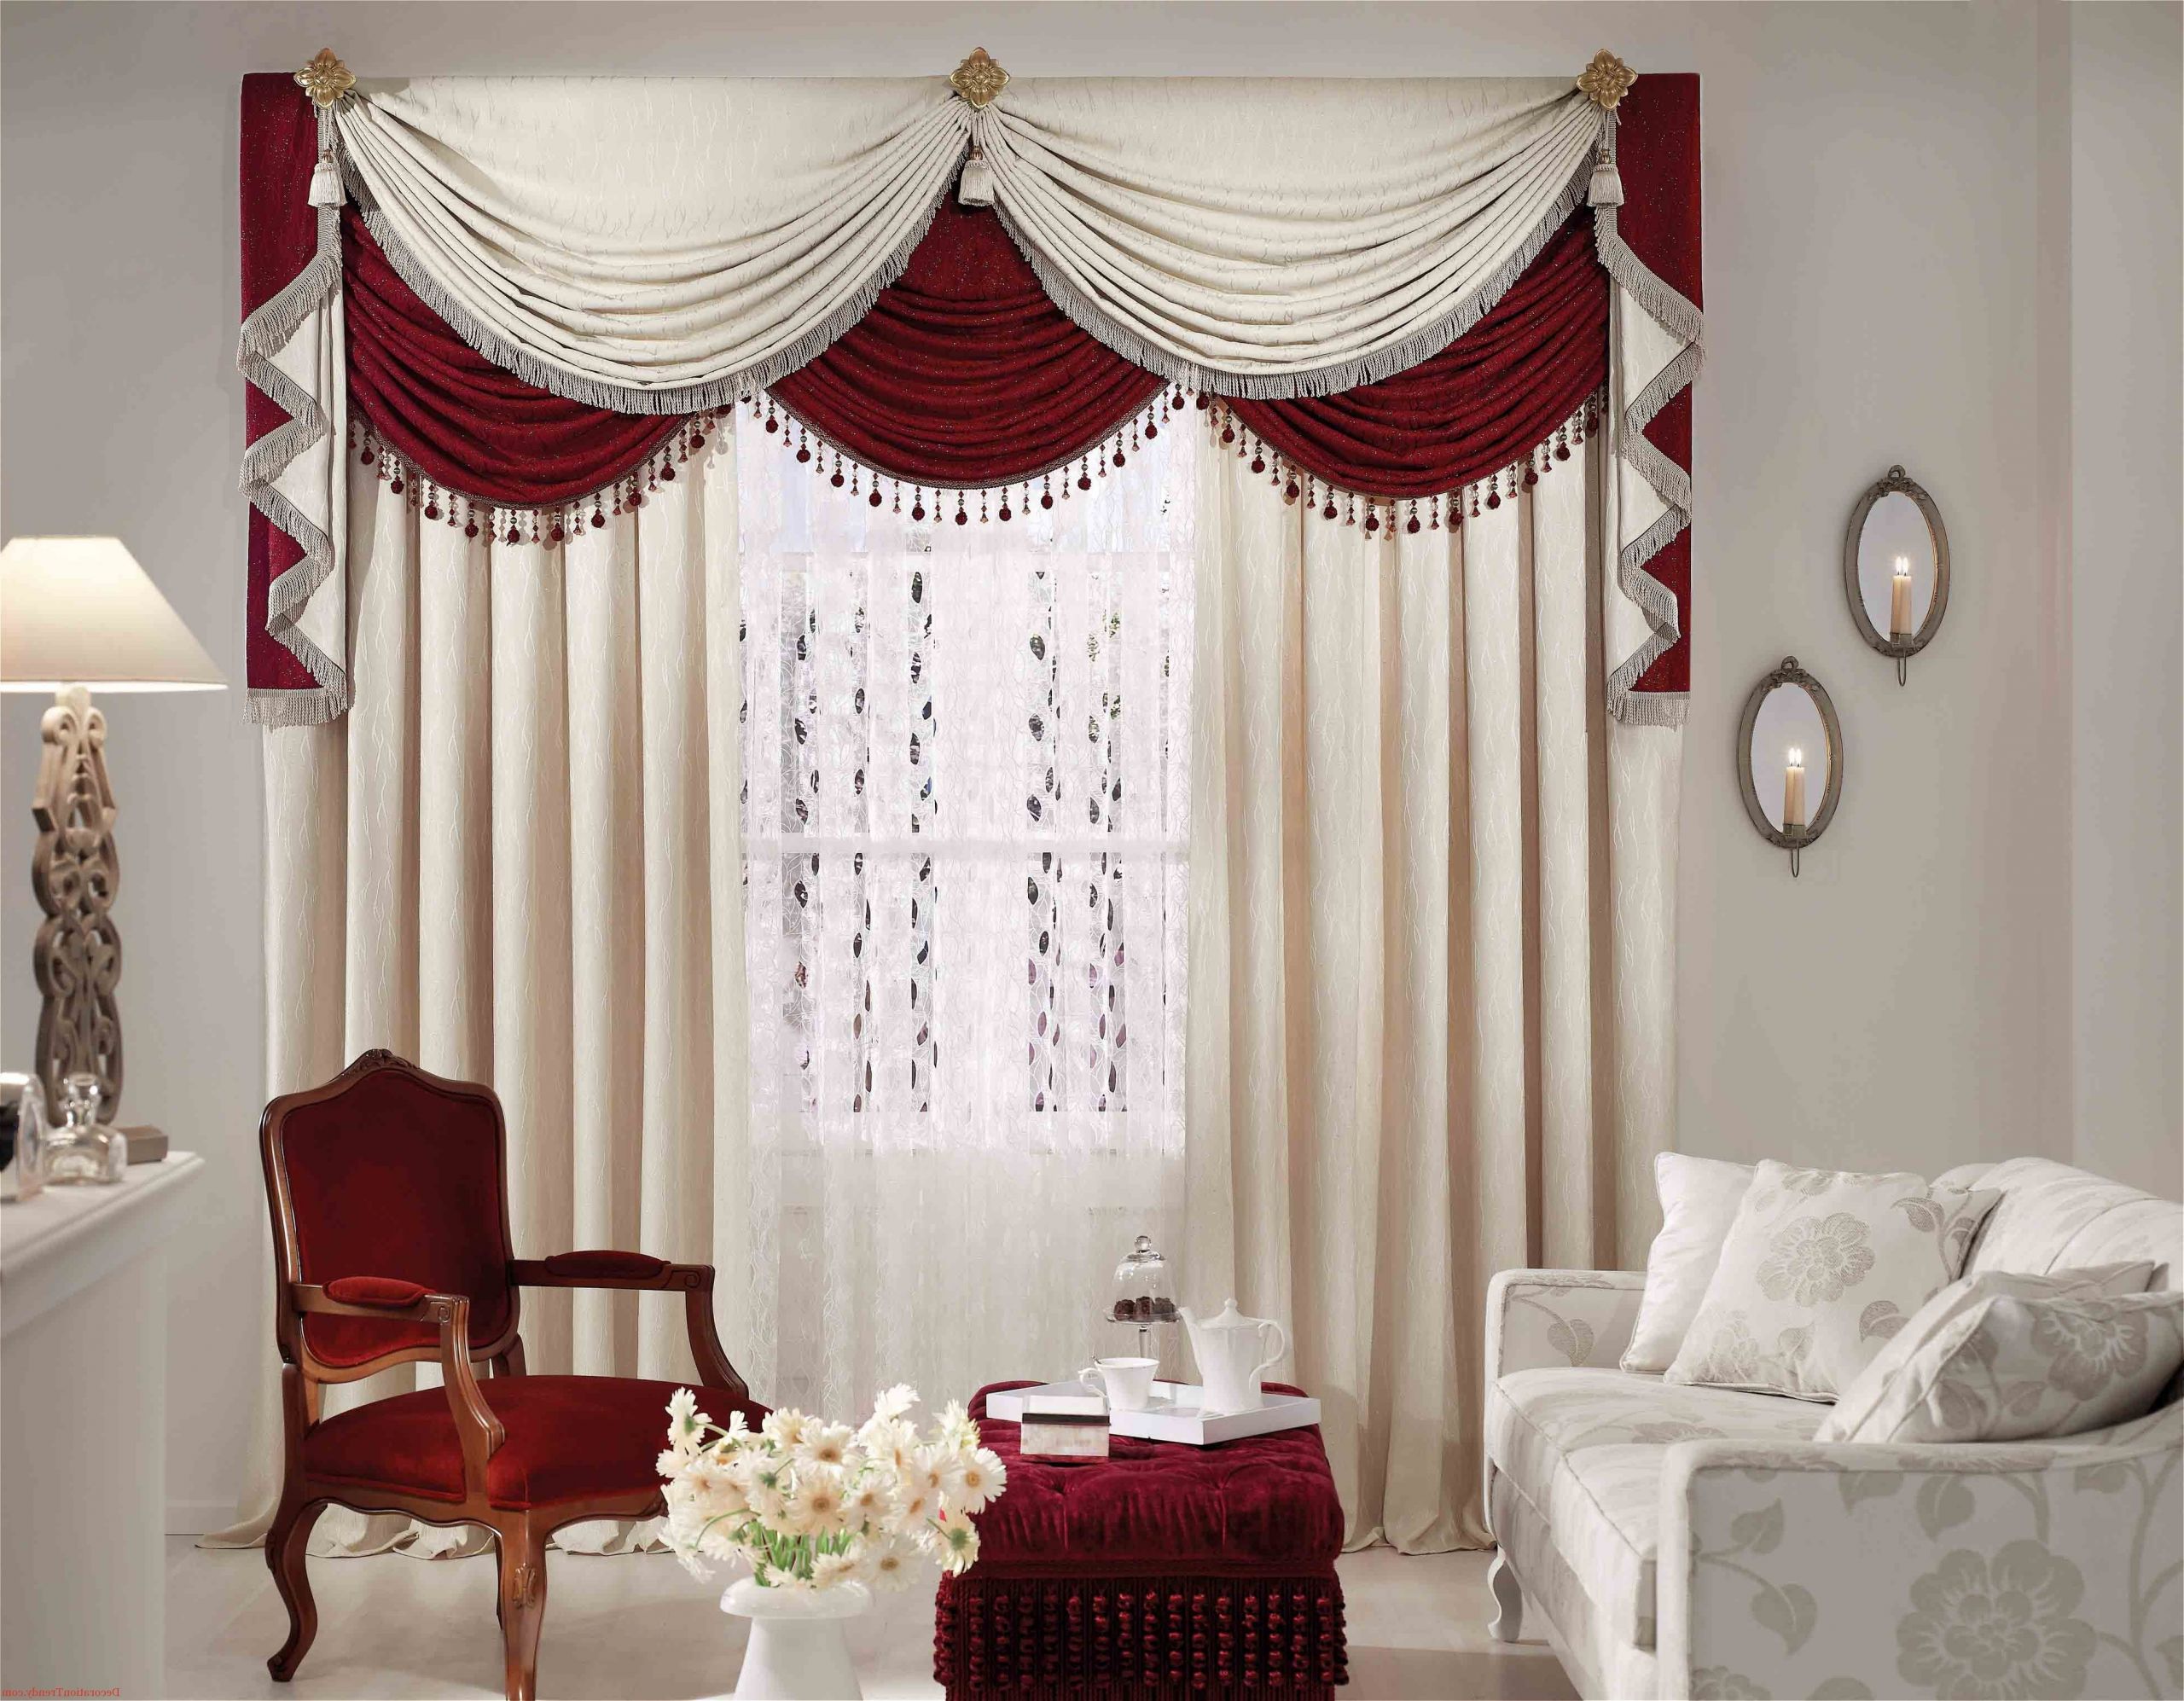 Best Of 62+ Charming pretty curtains for living room Satisfy Your Imagination